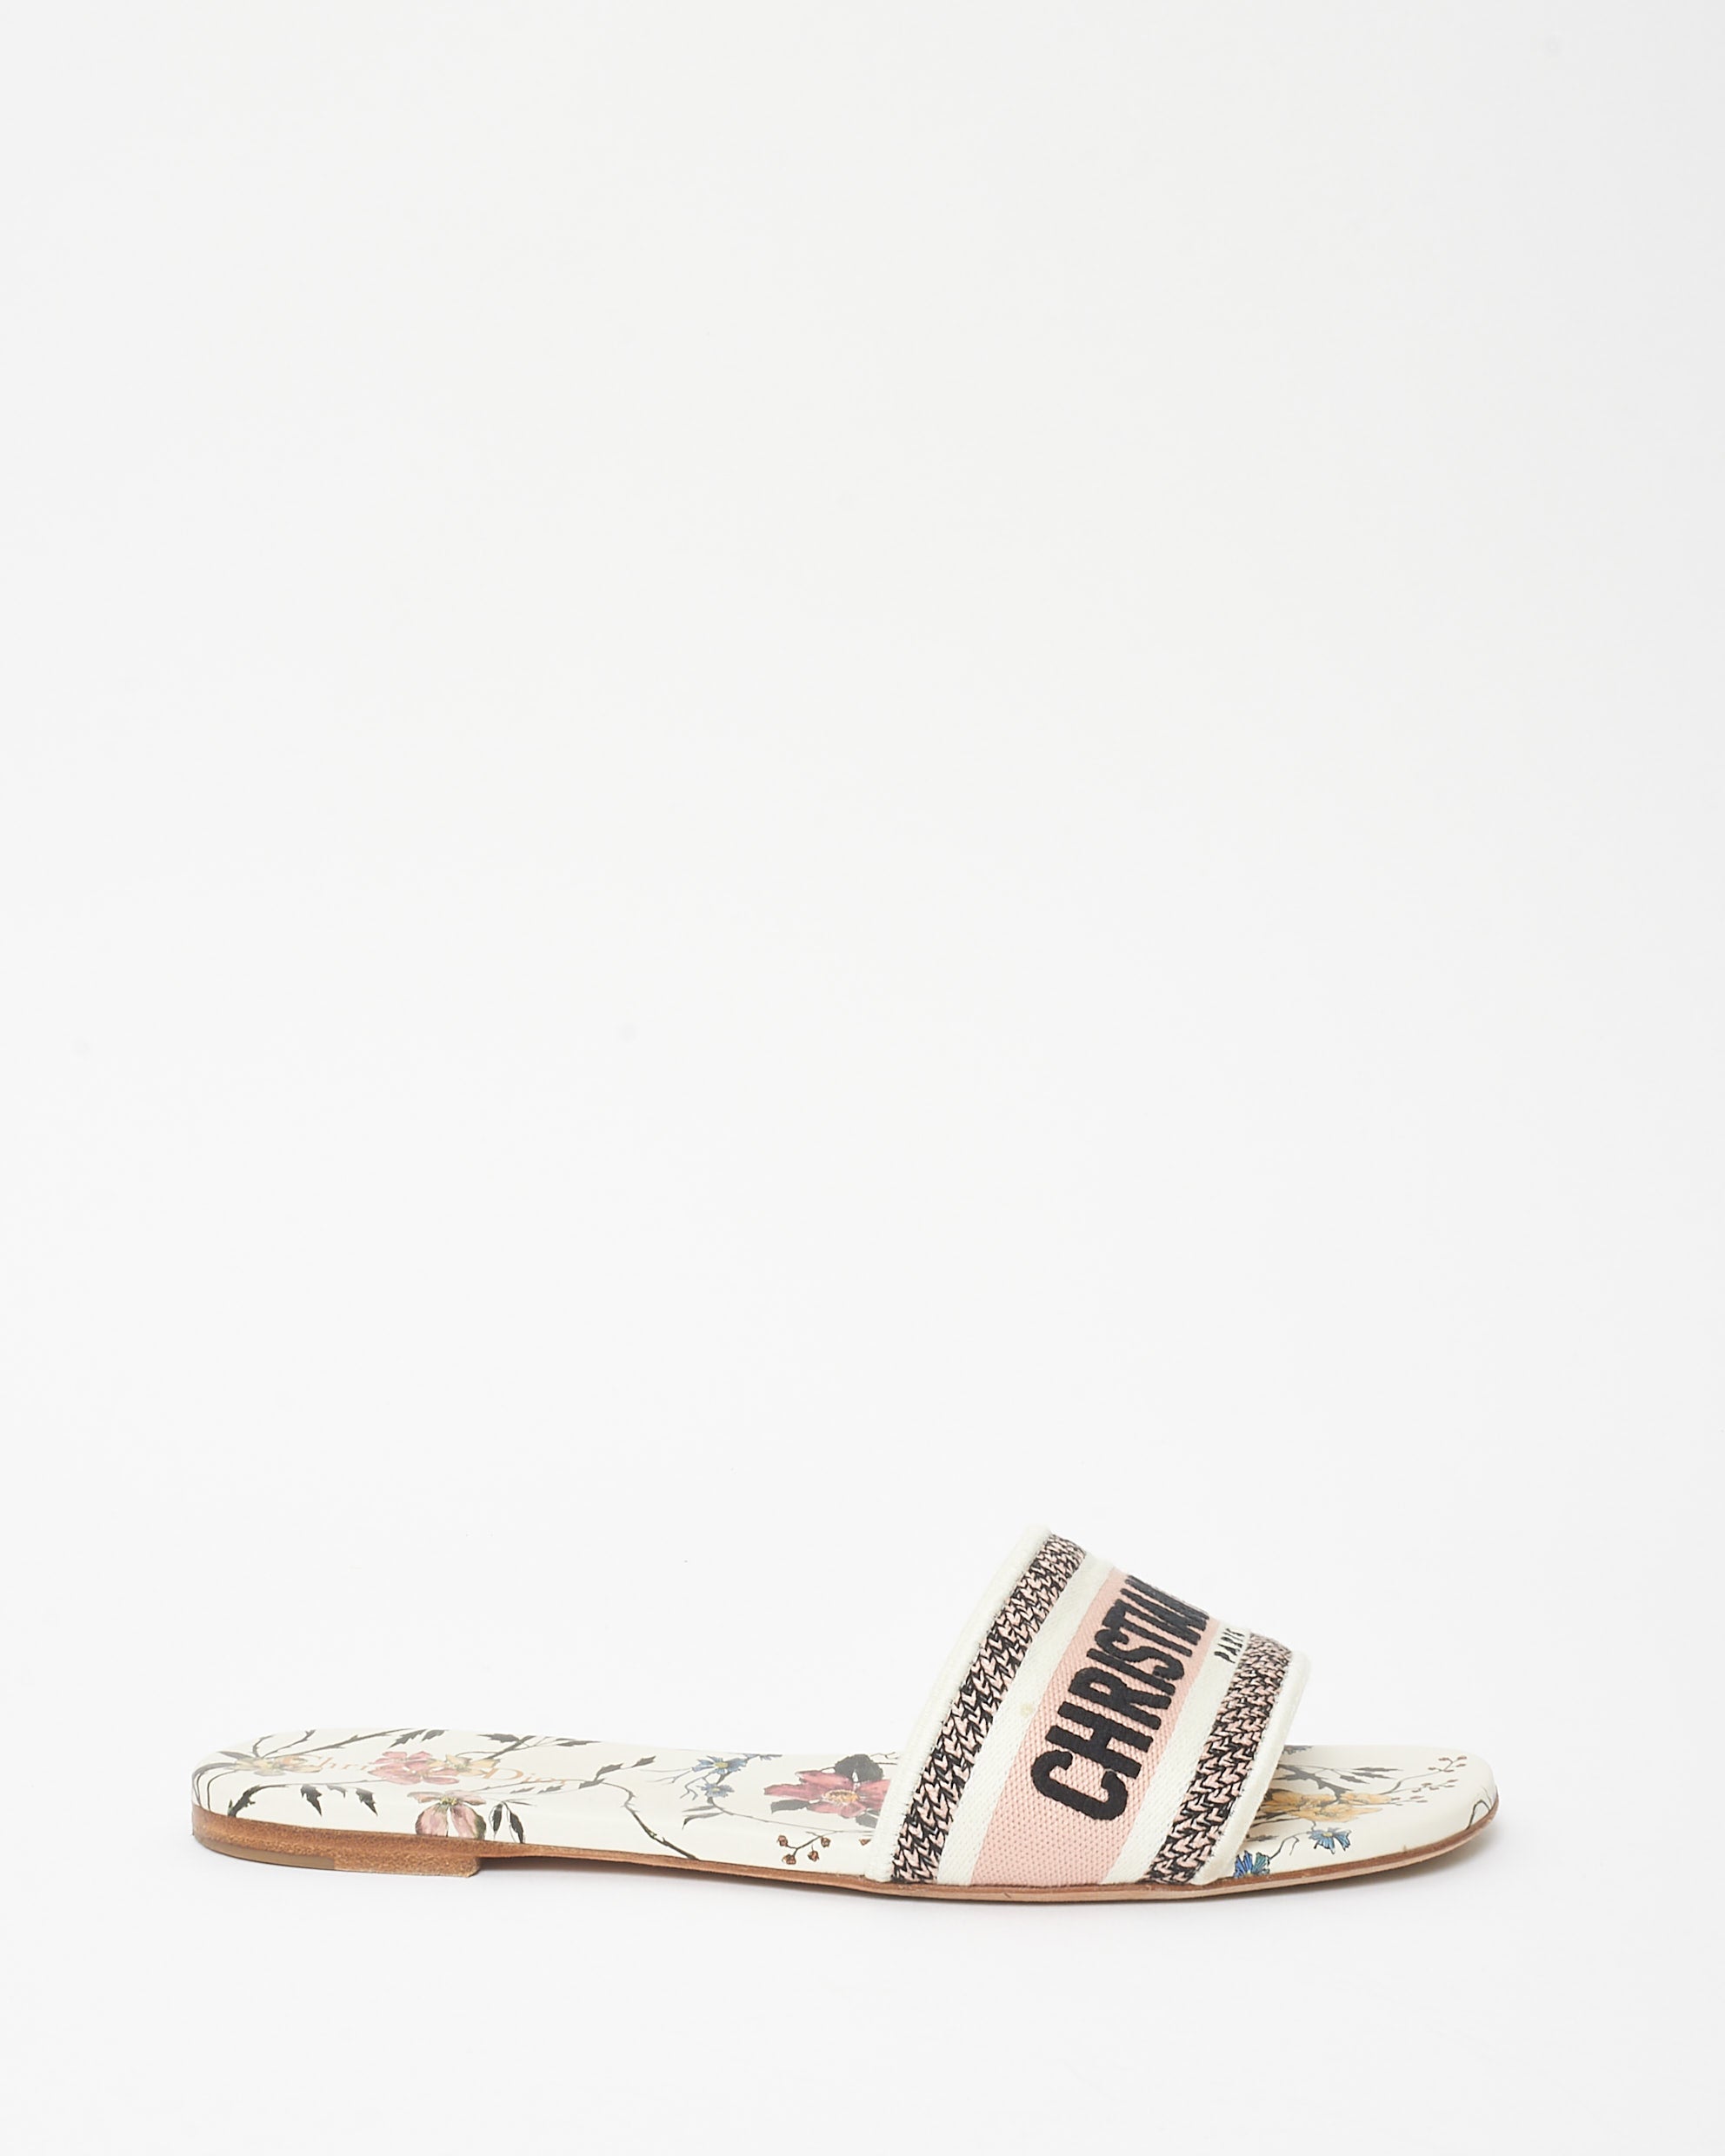 Buy Dior White u0026 Pink Floral Logo Embroidered D Way Slide - 41 -  Authenticated Pre-Owned | RETYCHE